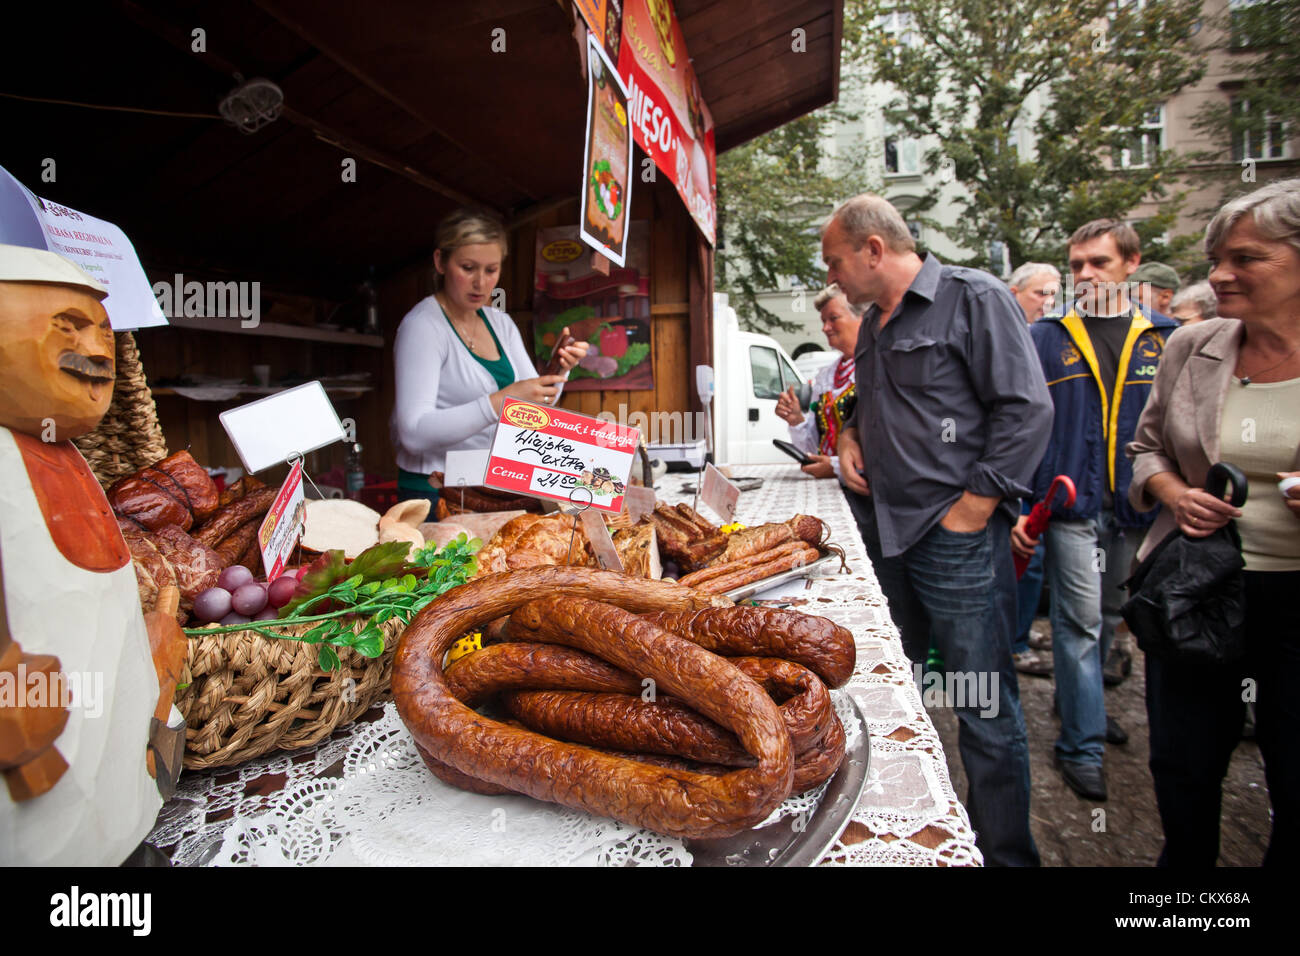 August 26, 2012 Cracow, Poland - Market stall with sausages and meats during annual traditional Polish food festival. Shown sausage (pol. - kiełbasa) is a food usually made from ground meat with a skin around it. Sausage making is a traditional food preservation technique. Sausages may be preserved by curing, drying, or smoking. Stock Photo